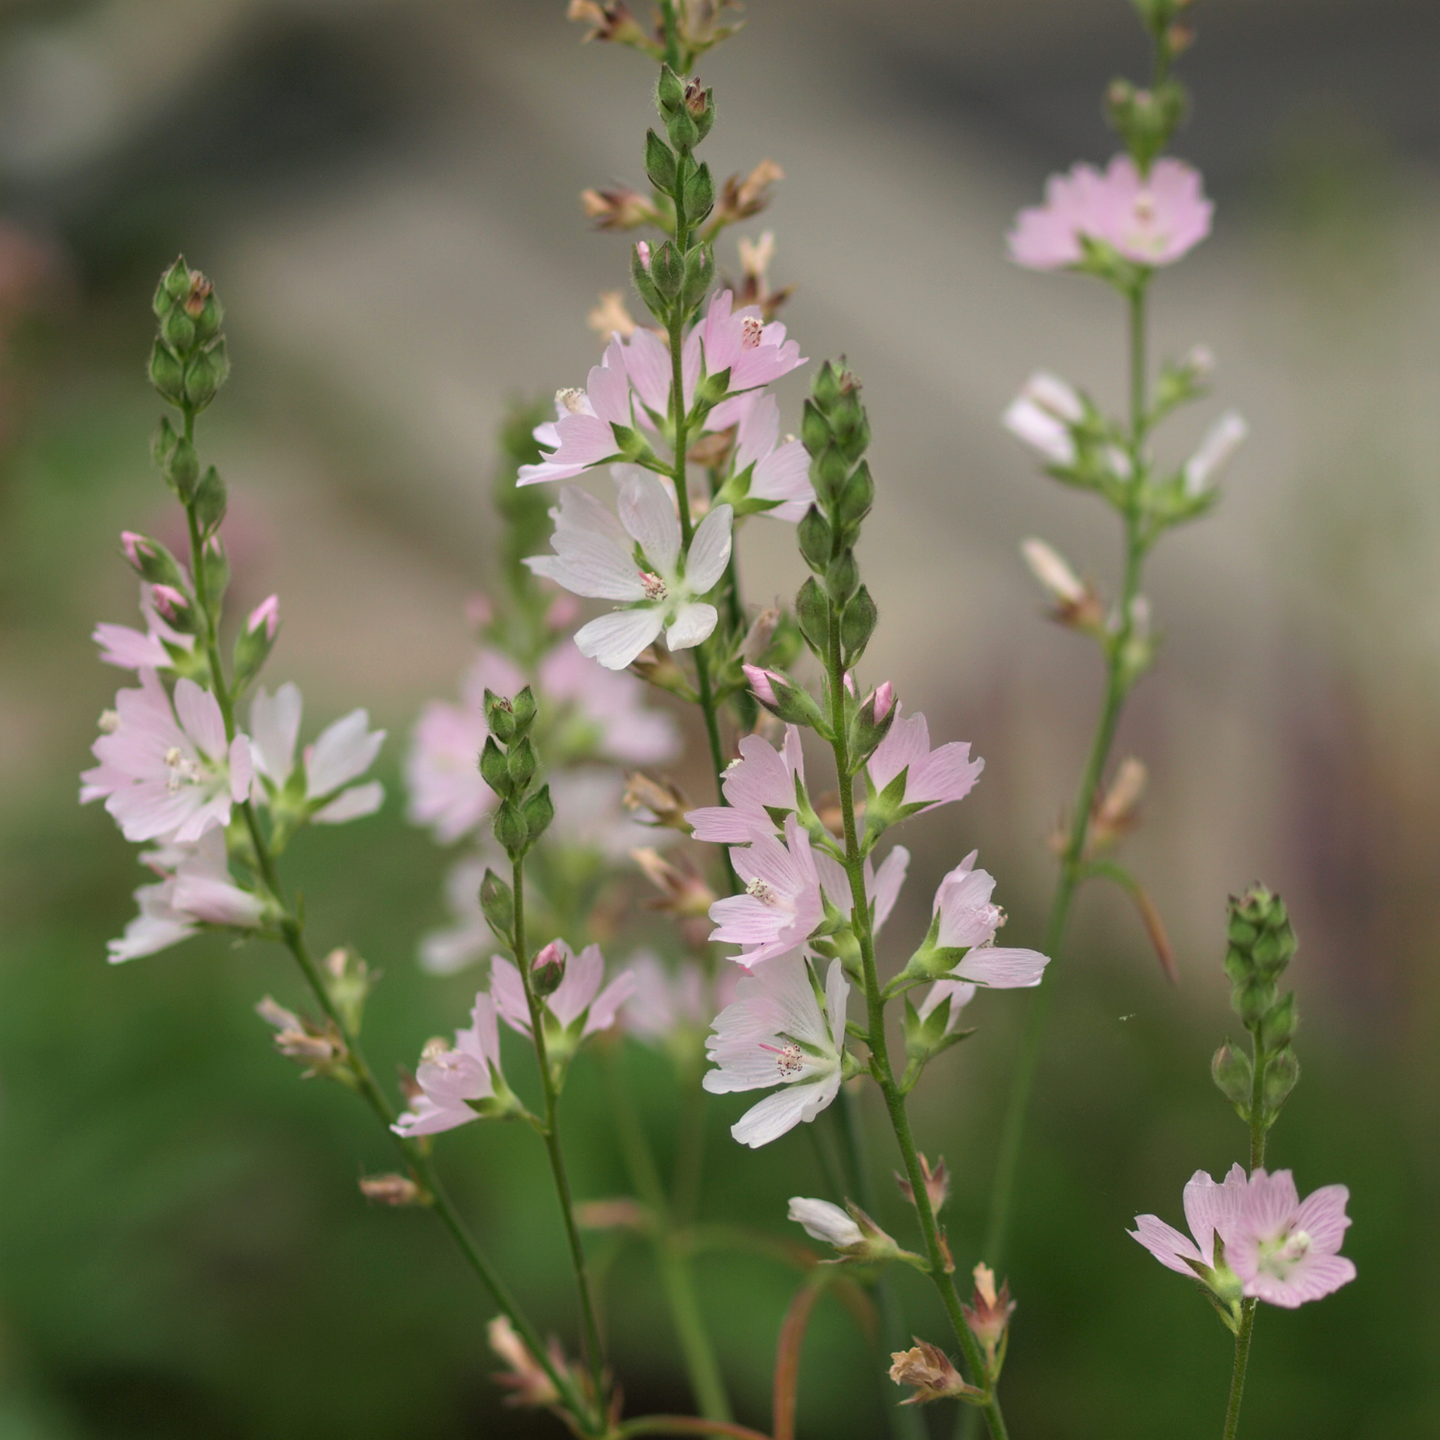 Meadow Checkermallow flowers (Sidalcea campestris). One of 100+ species of Pacific Northwest native plants available at Sparrowhawk Native Plants, Native Plant Nursery in Portland, Oregon.